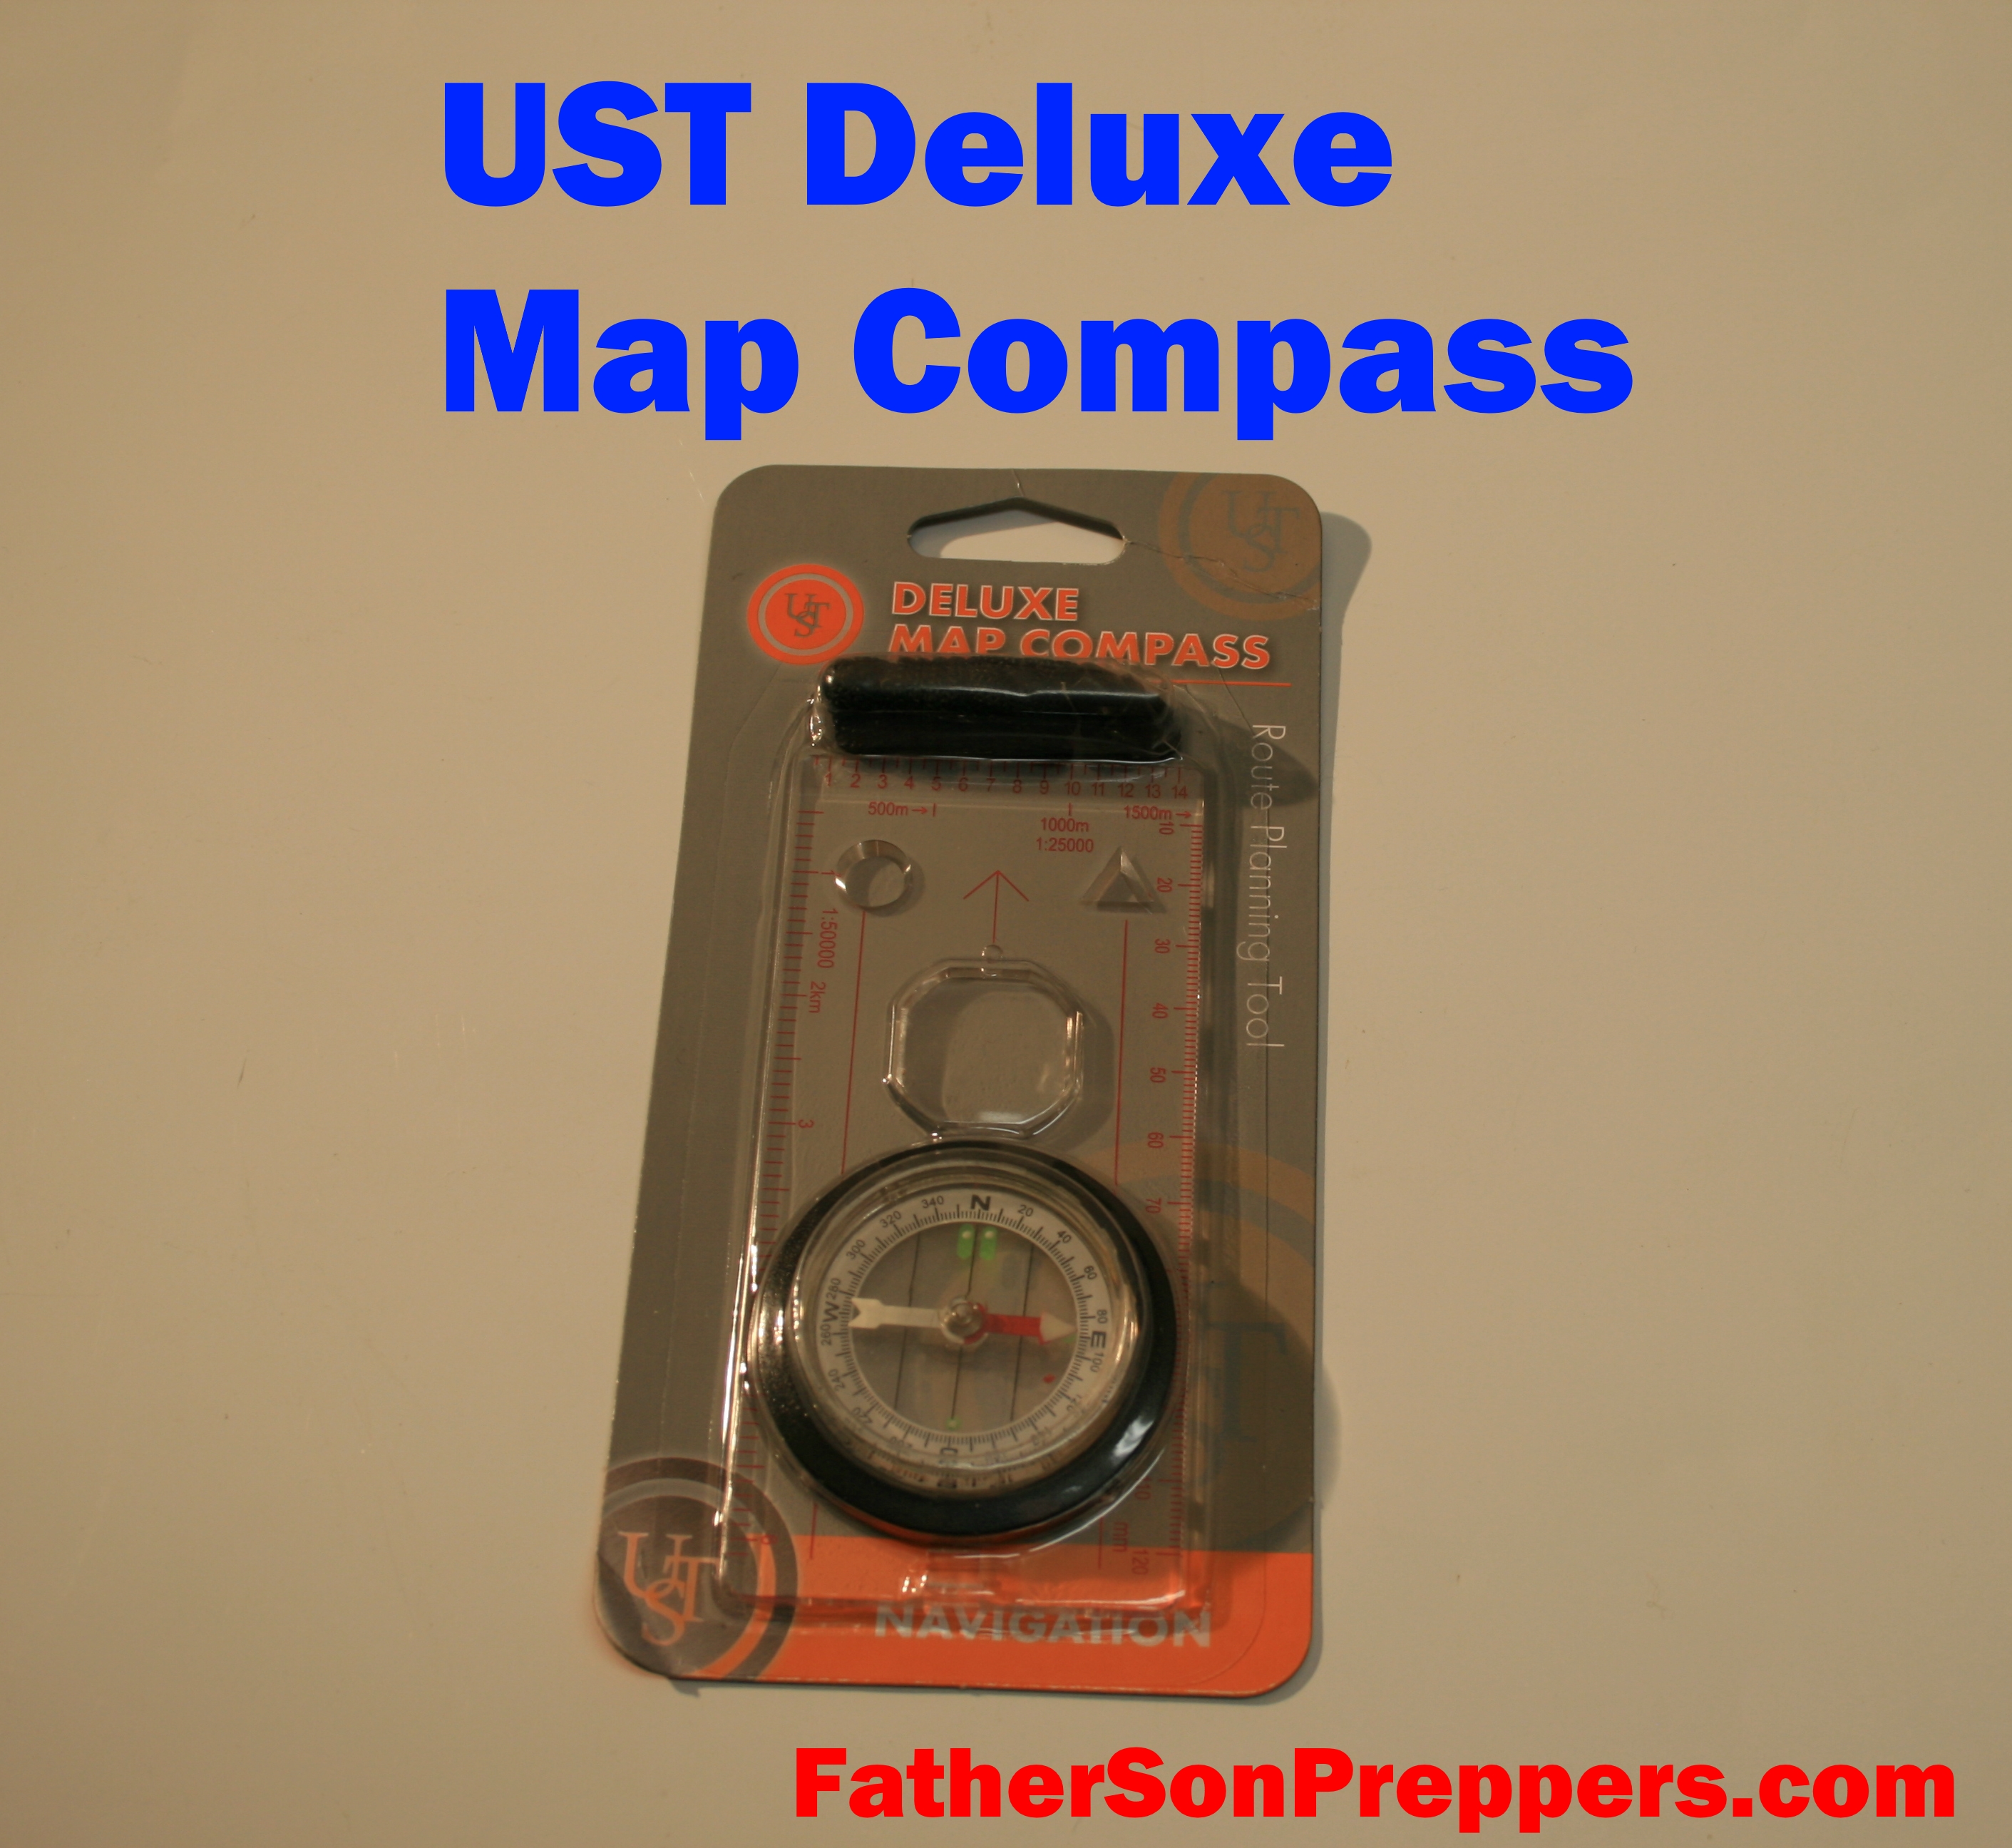 UST deluxe map compass main